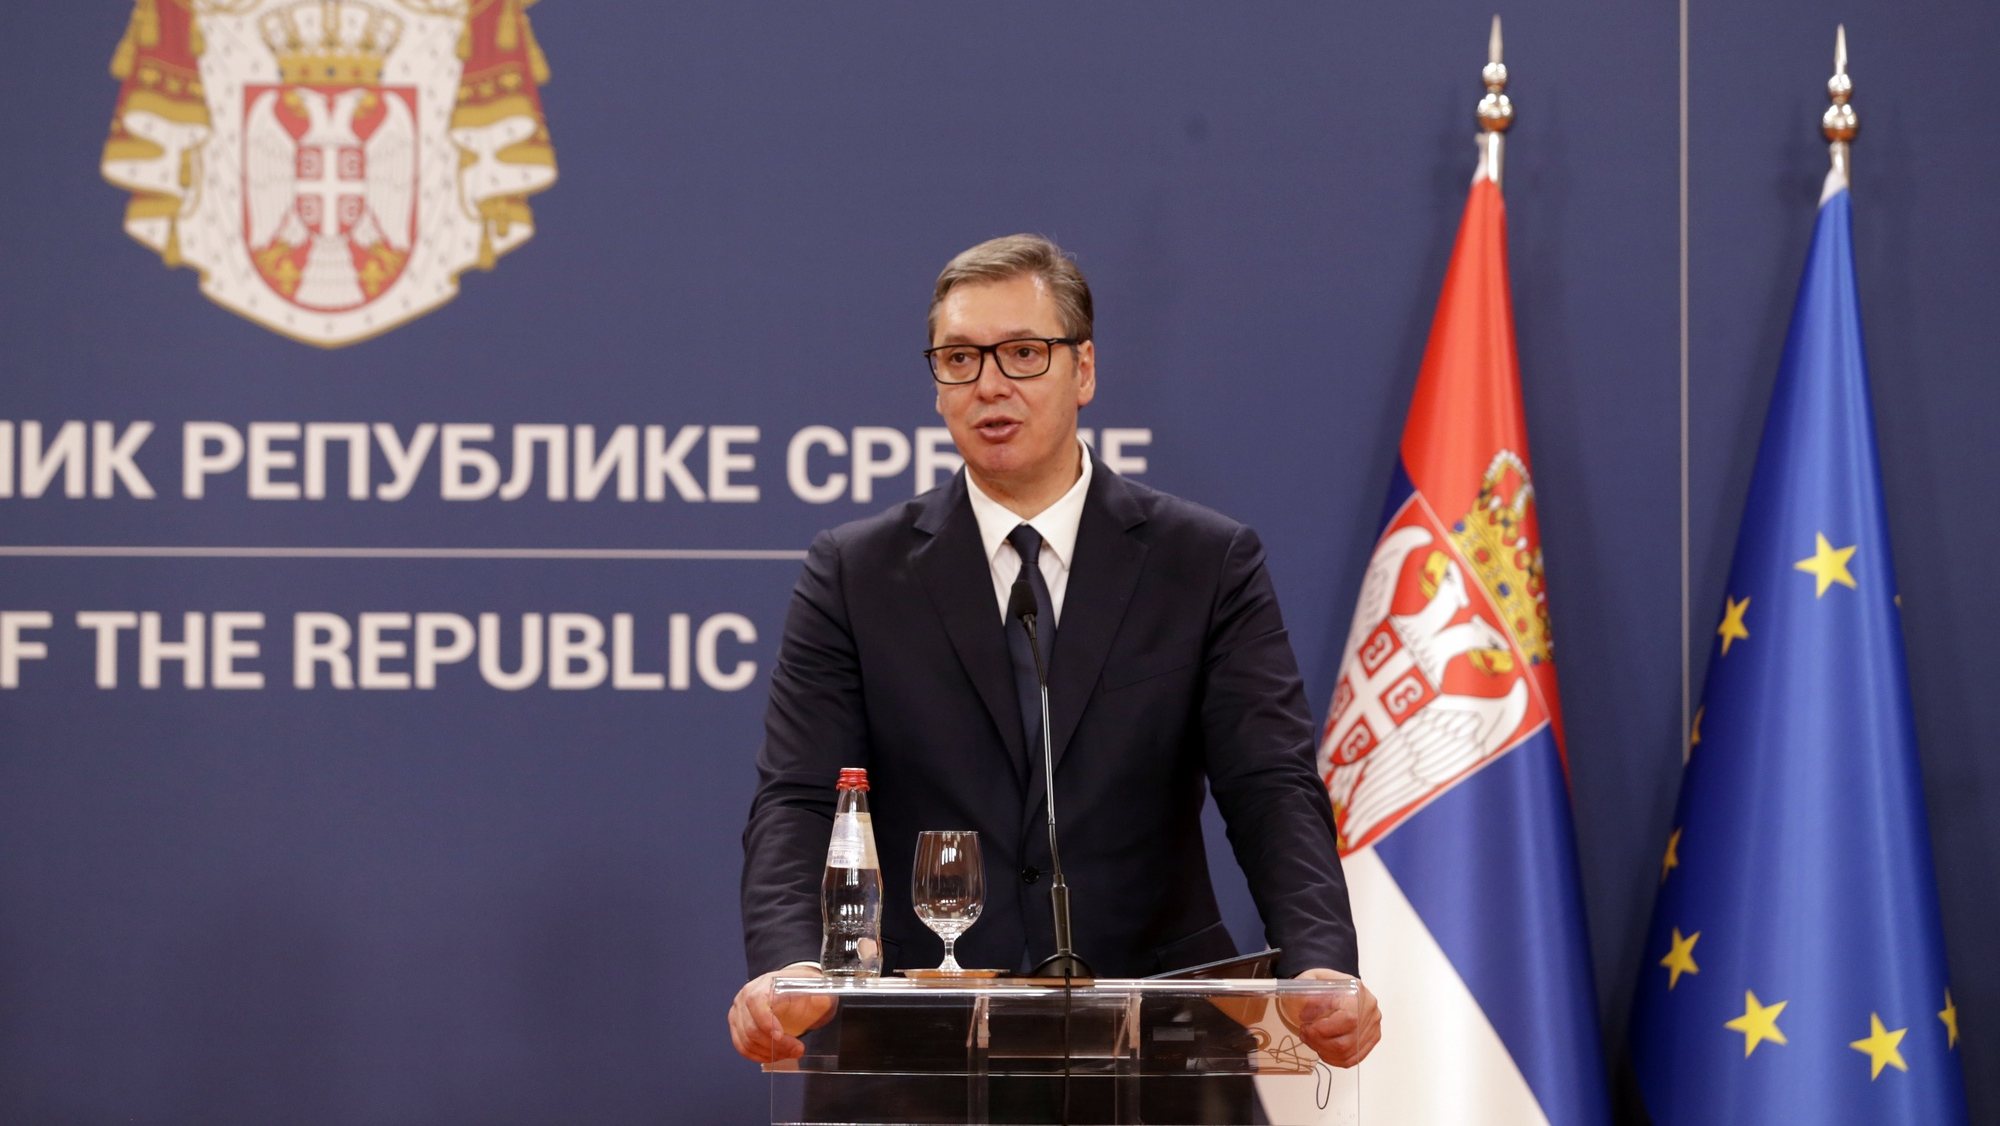 epa10097623 Serbian President Aleksandar Vucic speaks during a press conference with Spanish Prime Minister after their meeting in Belgrade, Serbia, 29 July 2022. Prime Minister Sanchez is on an official state visit to Serbia.  EPA/ANDREJ CUKIC